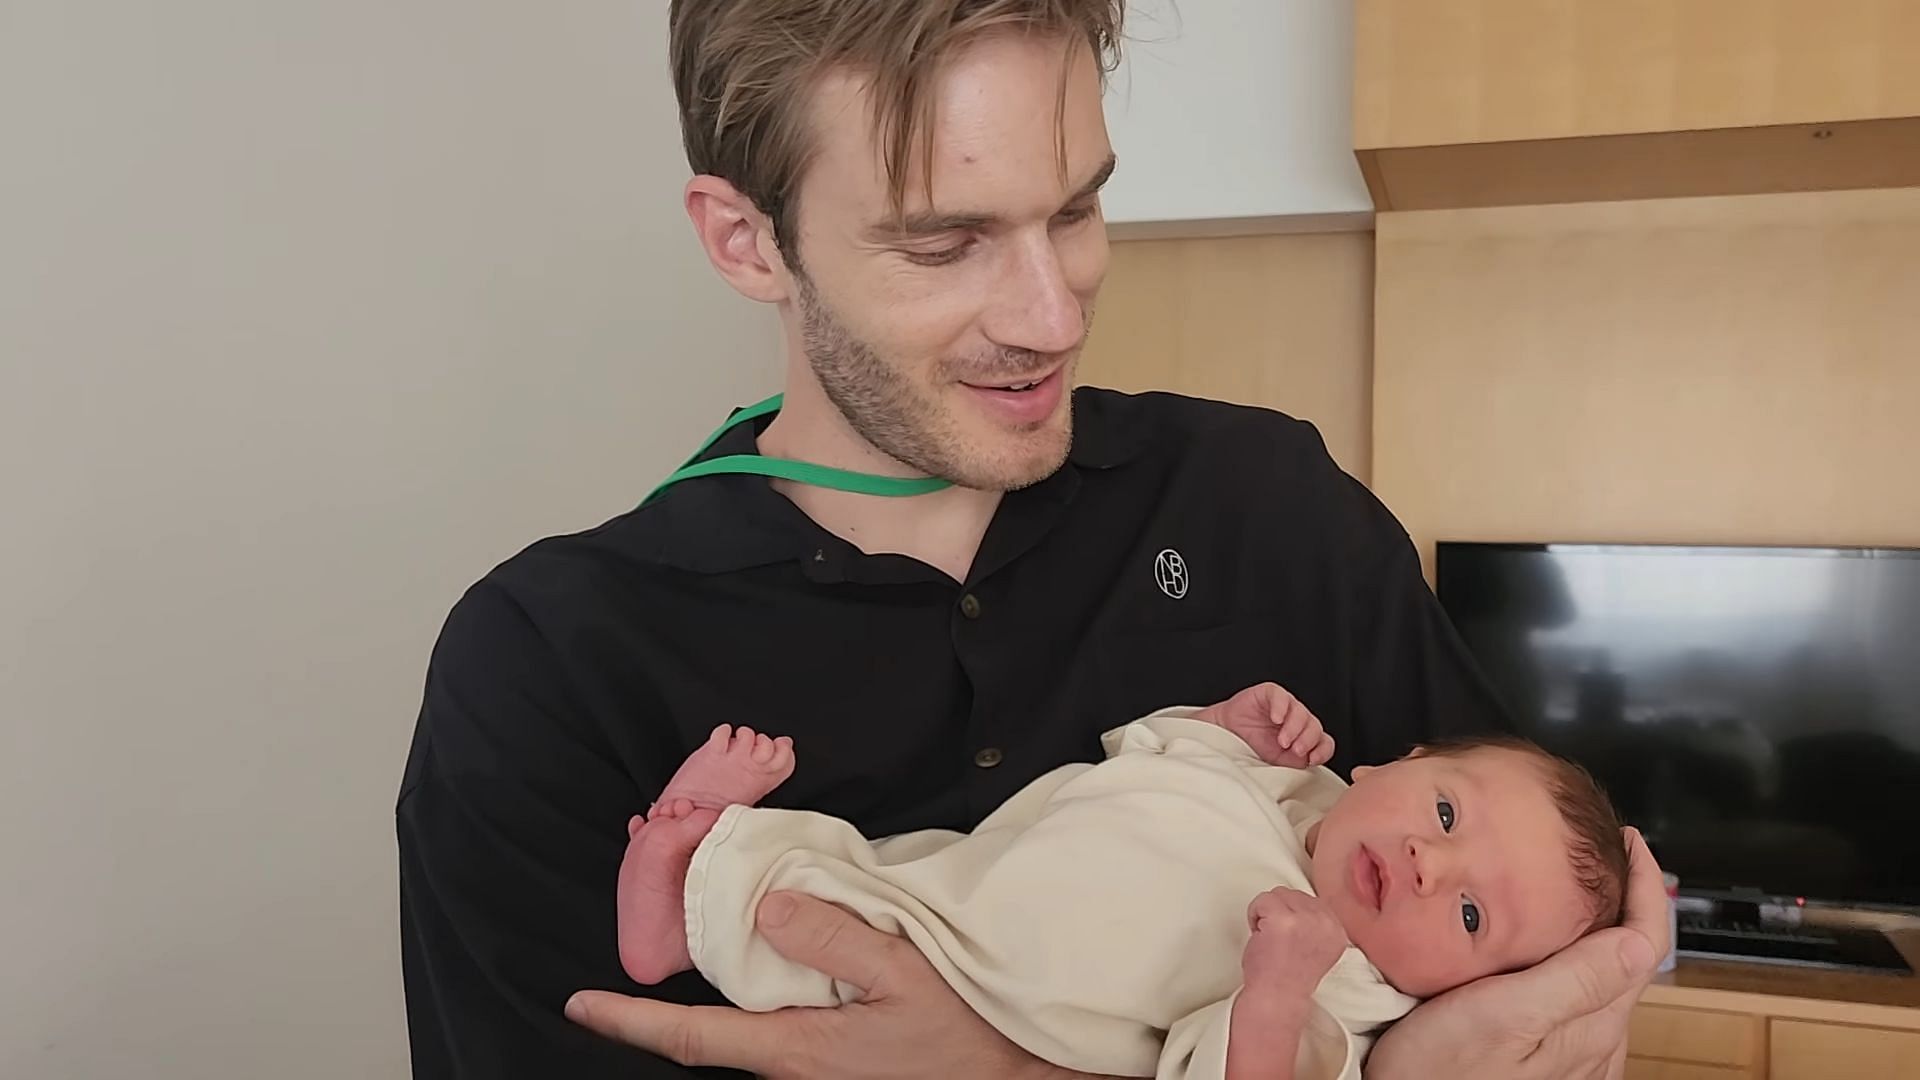 PewDiePie shares his experience of being a father (Image via PewDiePie/YouTube)